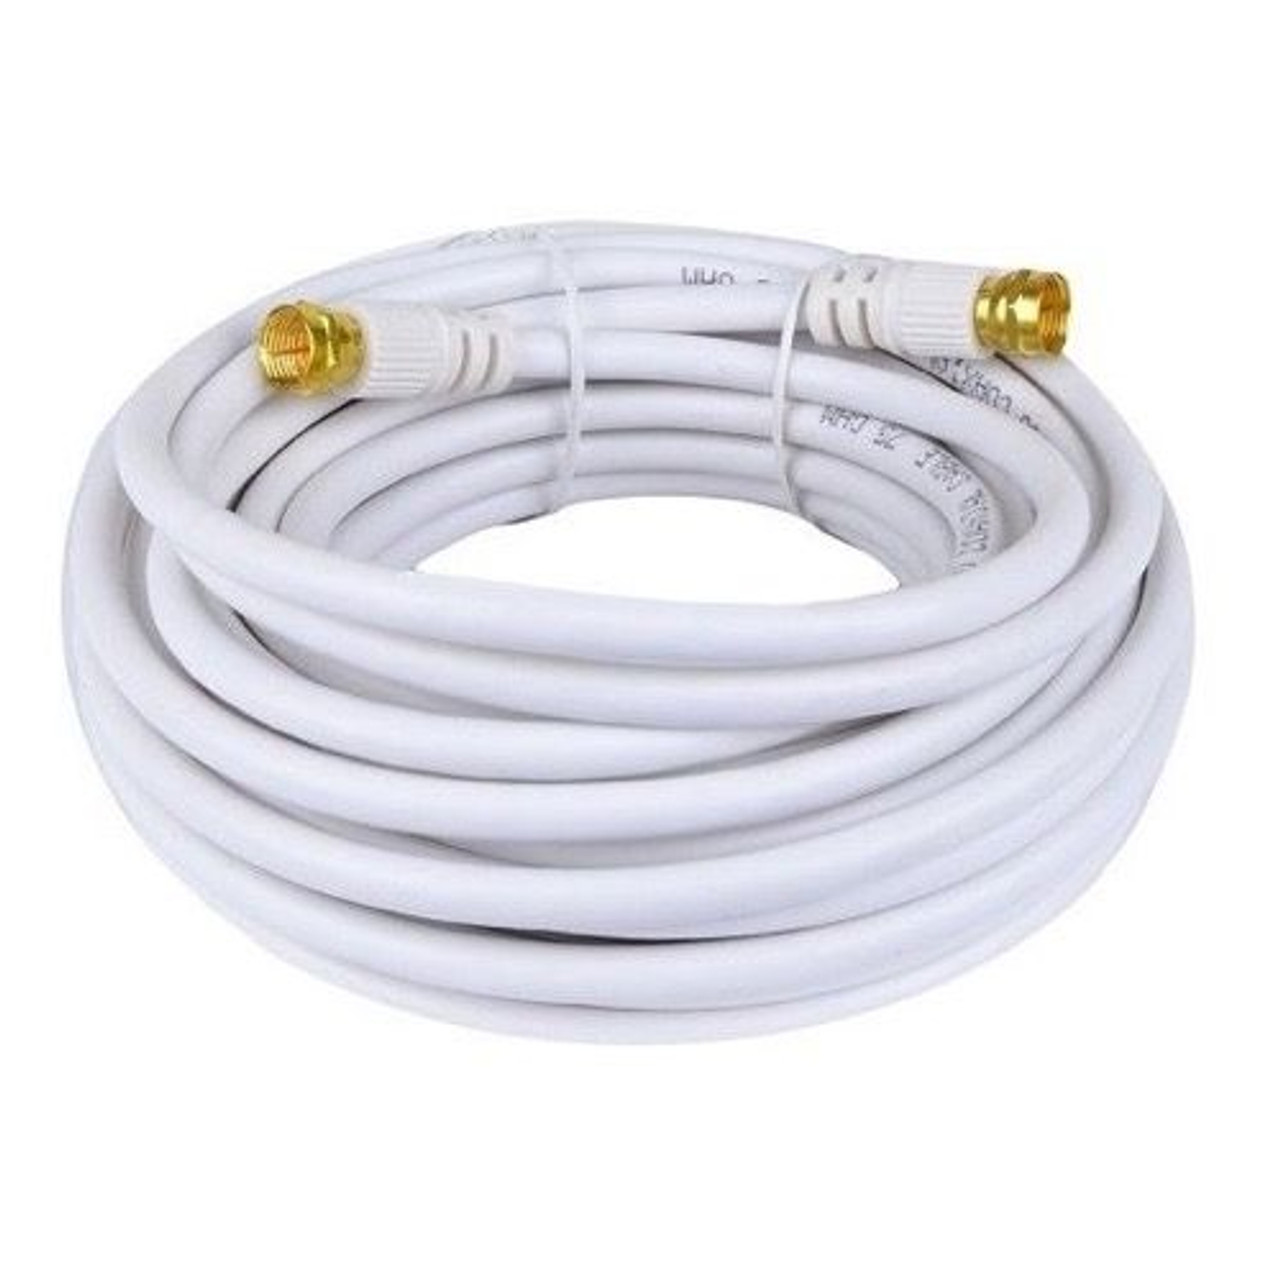 Eagle 25' FT RG59 Coaxial Cable White with F-Connector Each End 75 Ohm Factory Installed Gold RG-59 Coax Audio Video Signal Component Shielded TV Jumper